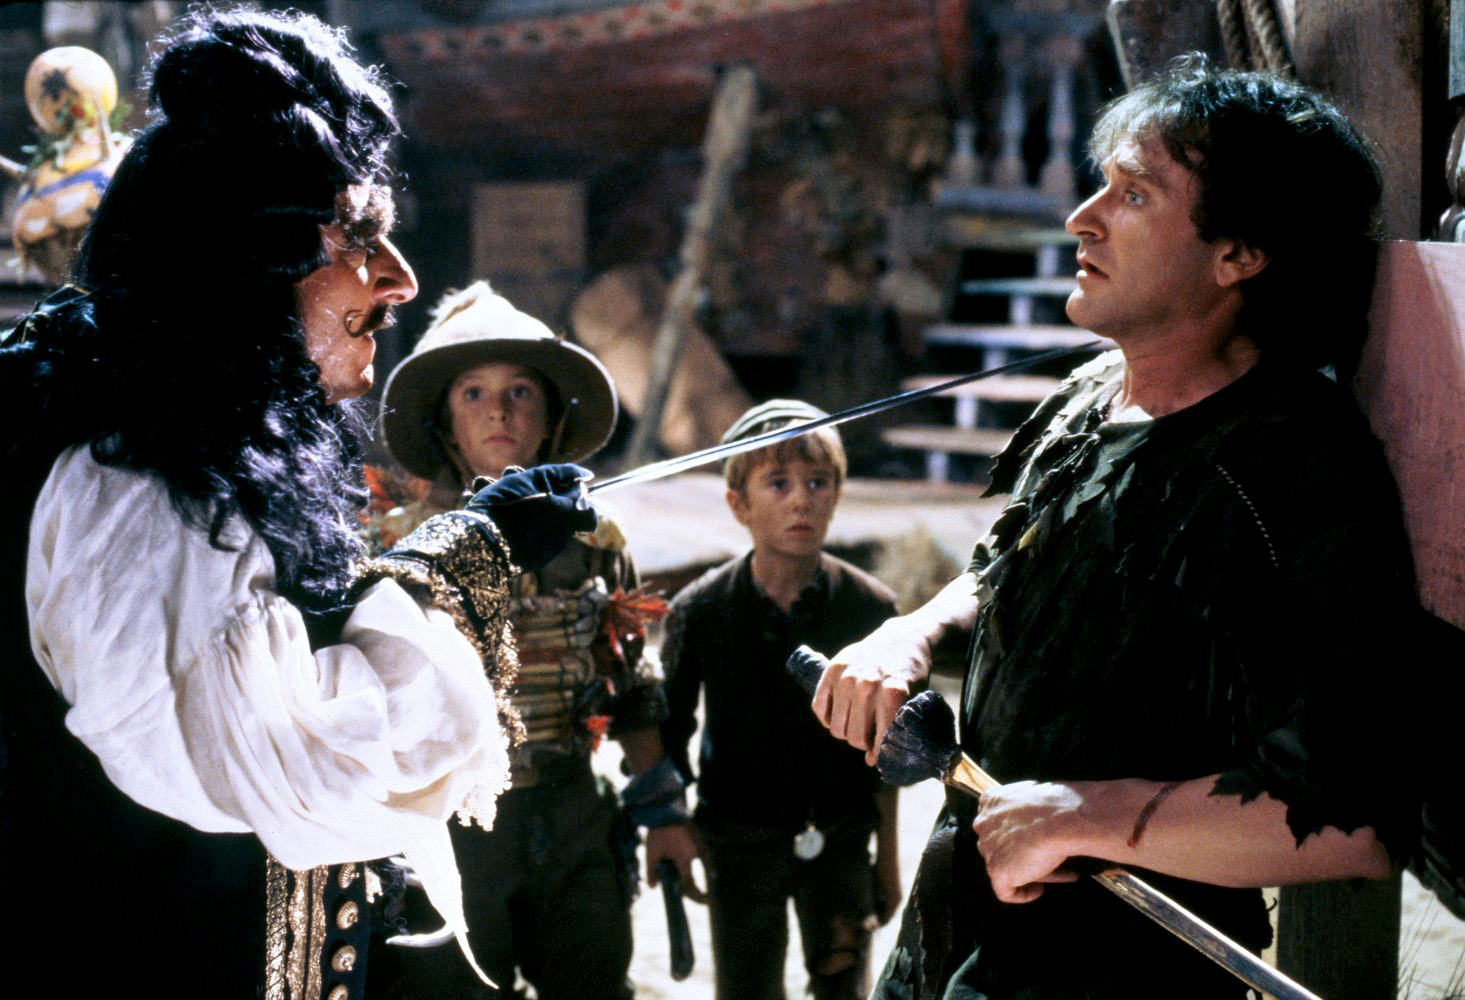 PHOTO: Dustin Hoffman, left, as Captain Hook, and Robin Williams, as Peter Pan, in a scene from "Hook."